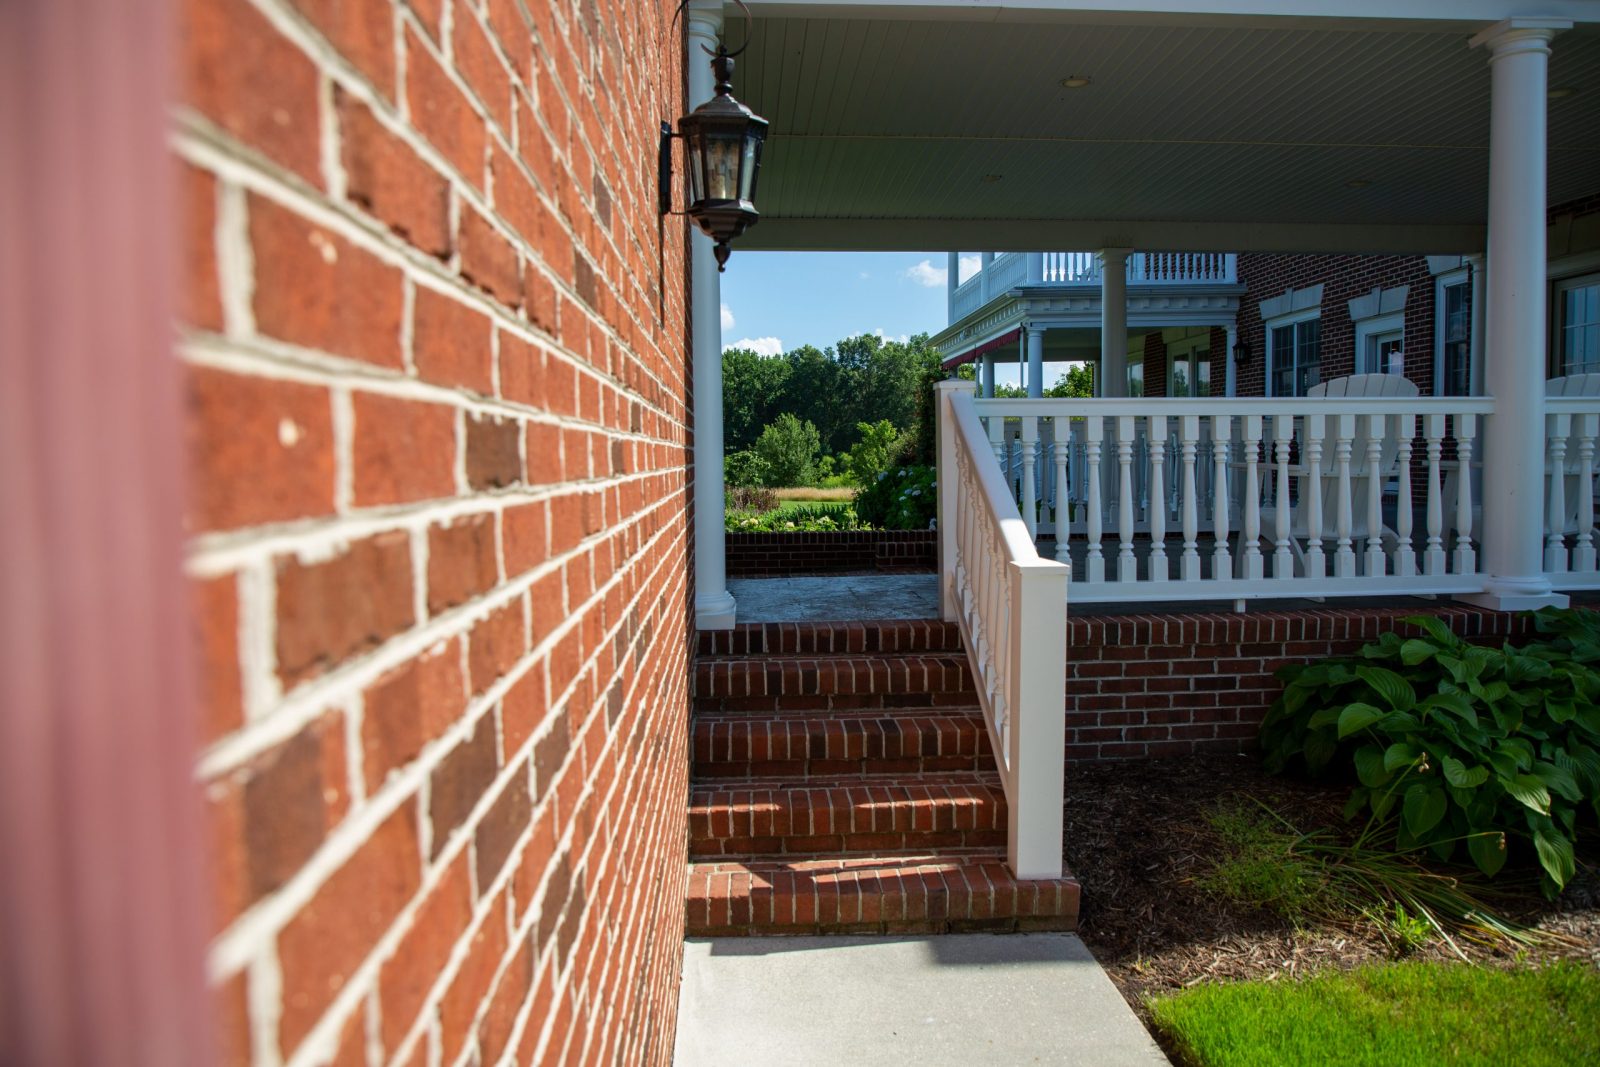 Brick wall and railing on outdoor brick staircase